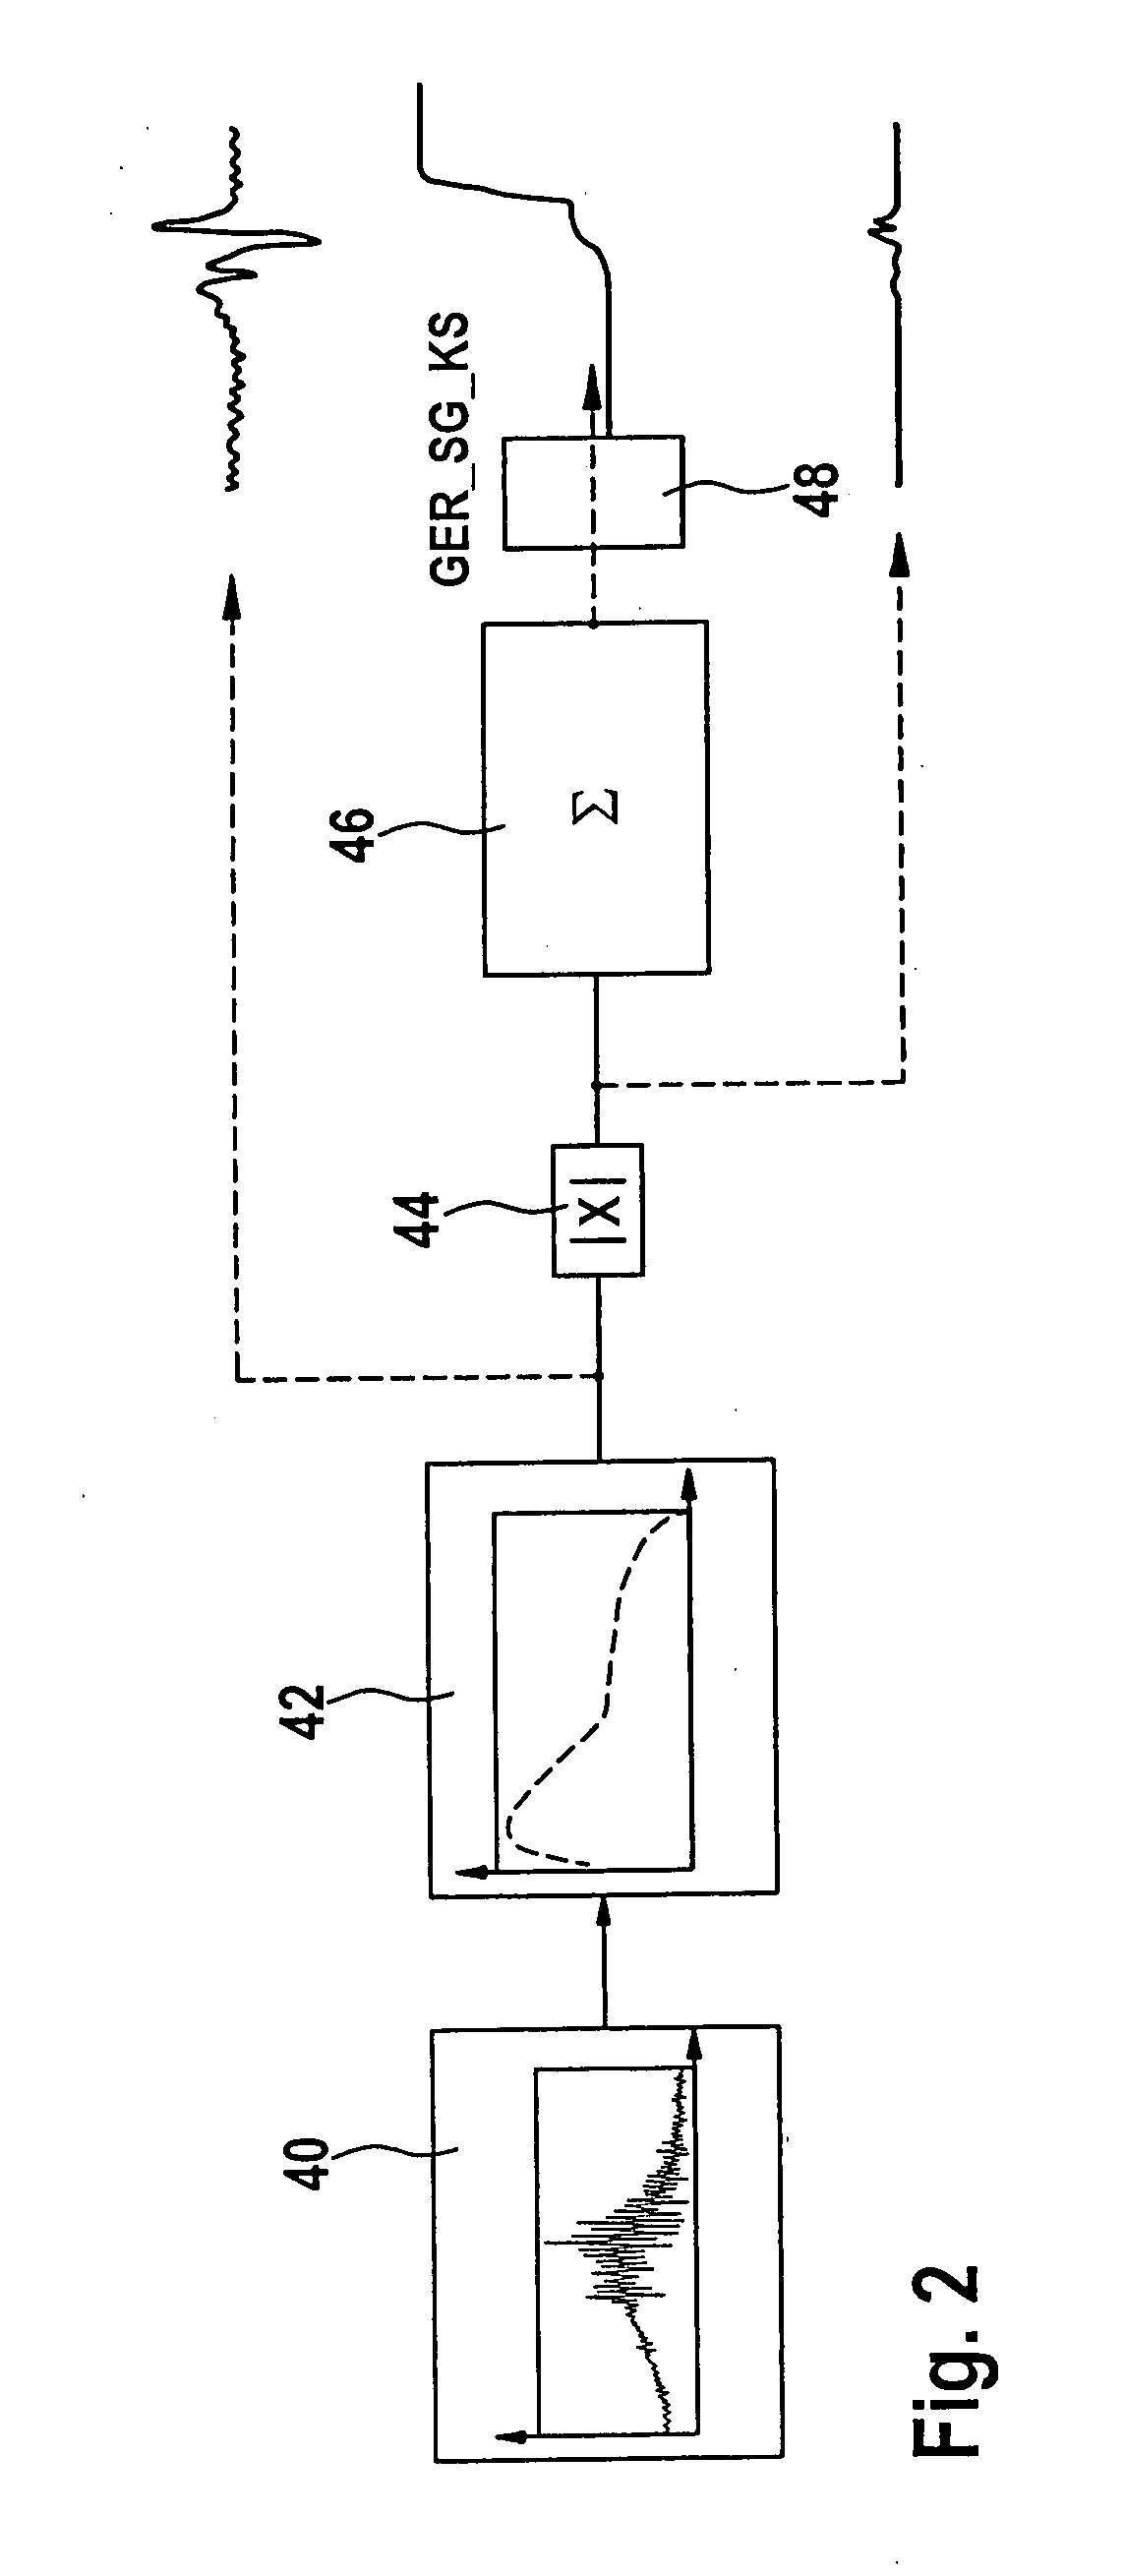 Method for ascertaining the noise emission of an internal combustion engine